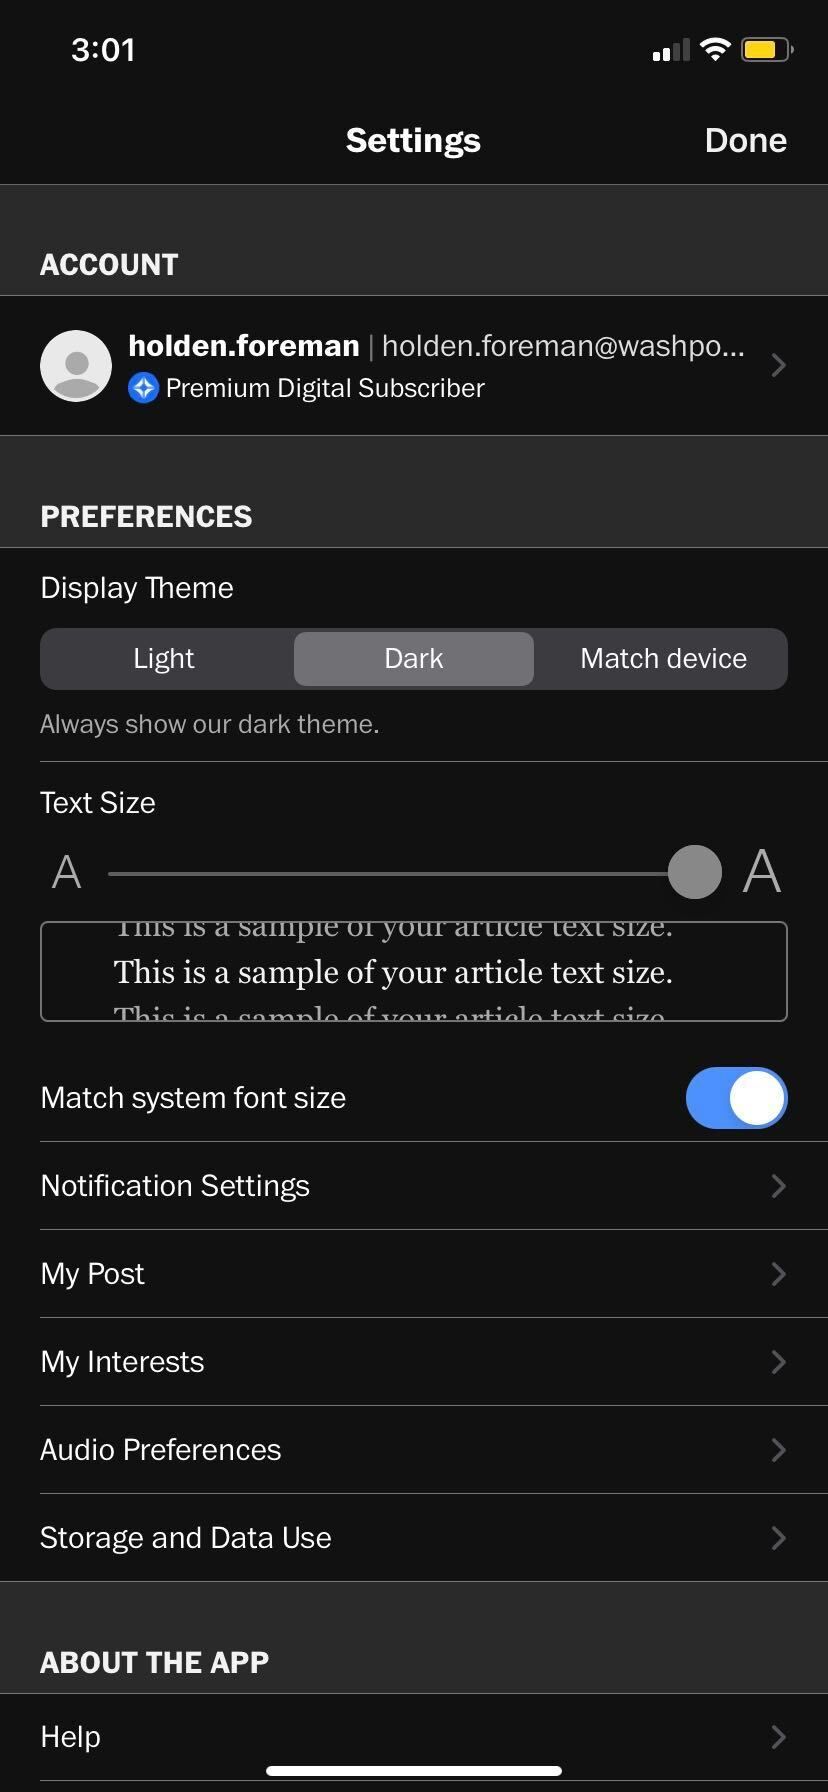 Screenshot of the Washington Post mobile app shows the settings menu has been opened. Various options are shown, including a light/dark mode toggle and text size scaler. A ‘Done’ button is visible in the top right corner of the screen.